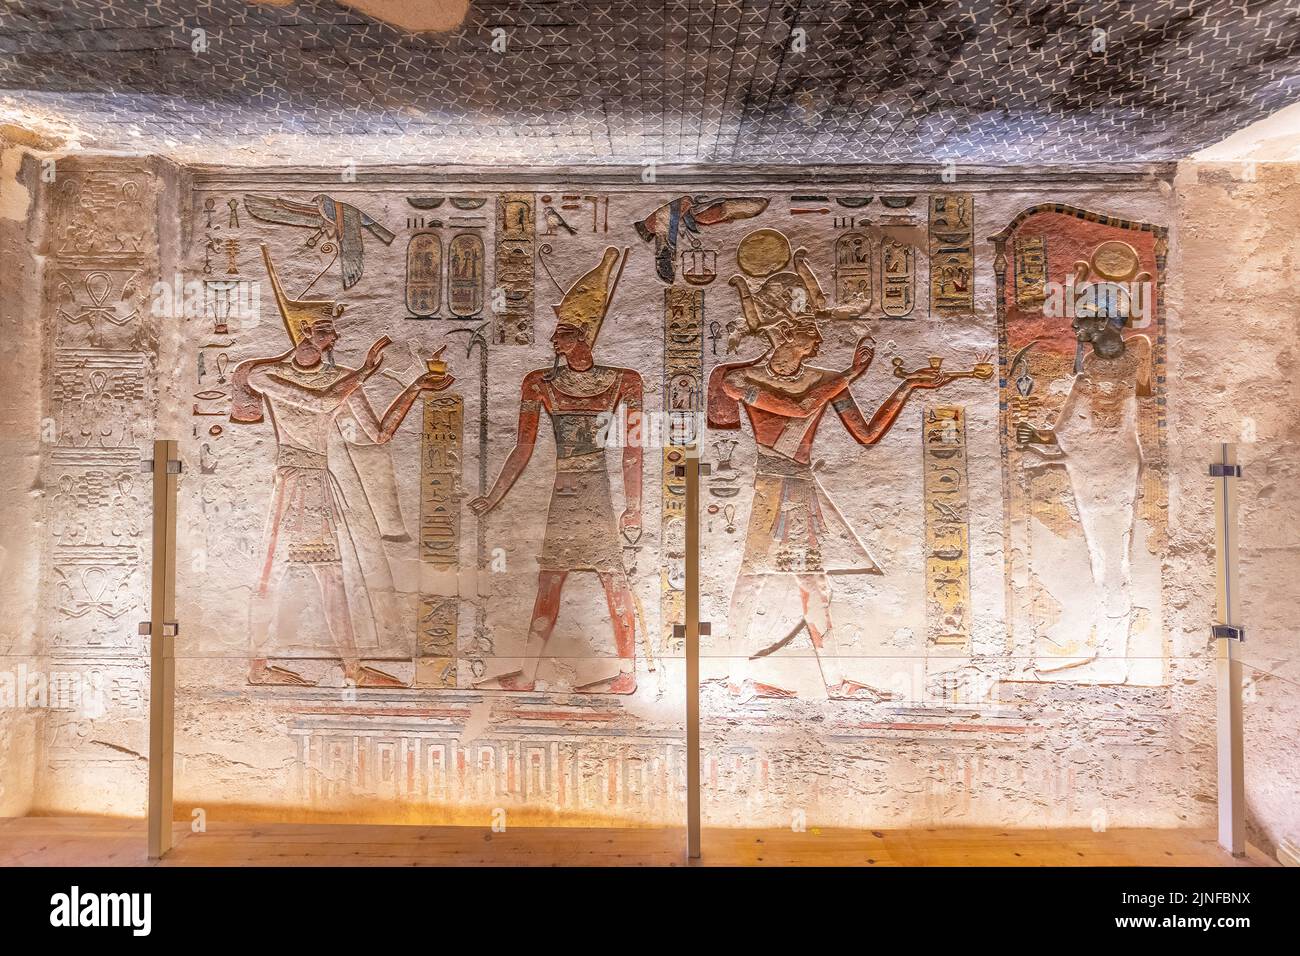 Luxor, Egypt; August 5, 2022 - The tomb of Rameses III in the Valley of the Kings, Luxor, Egypt. Stock Photo